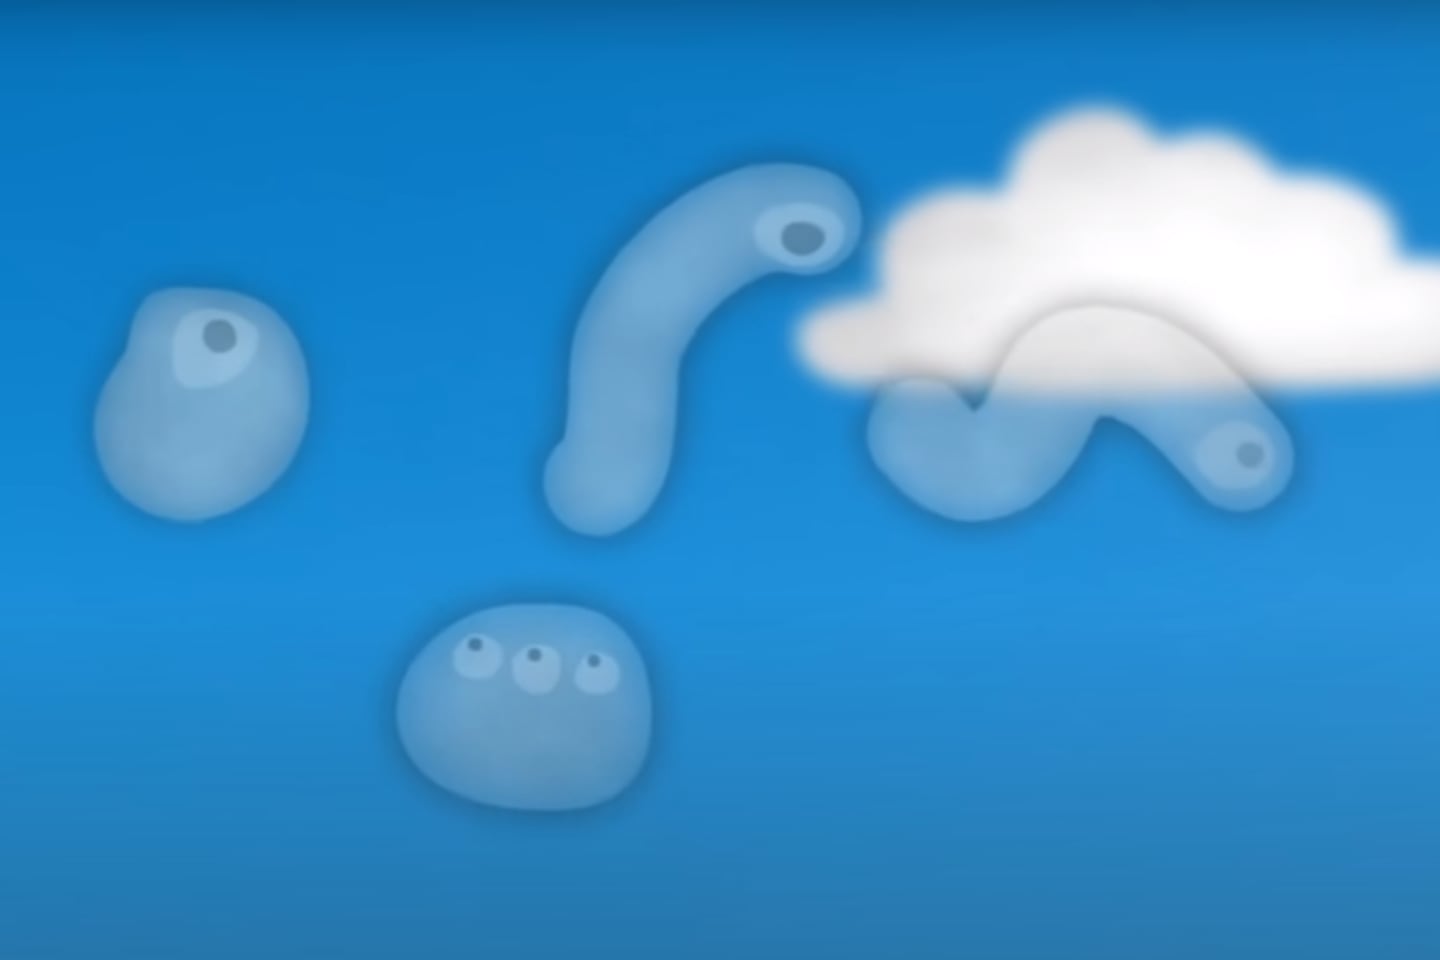 Captura de pantalla del video "What are those floaty things in your eye? - Michael Mauser" de Ted-Ed